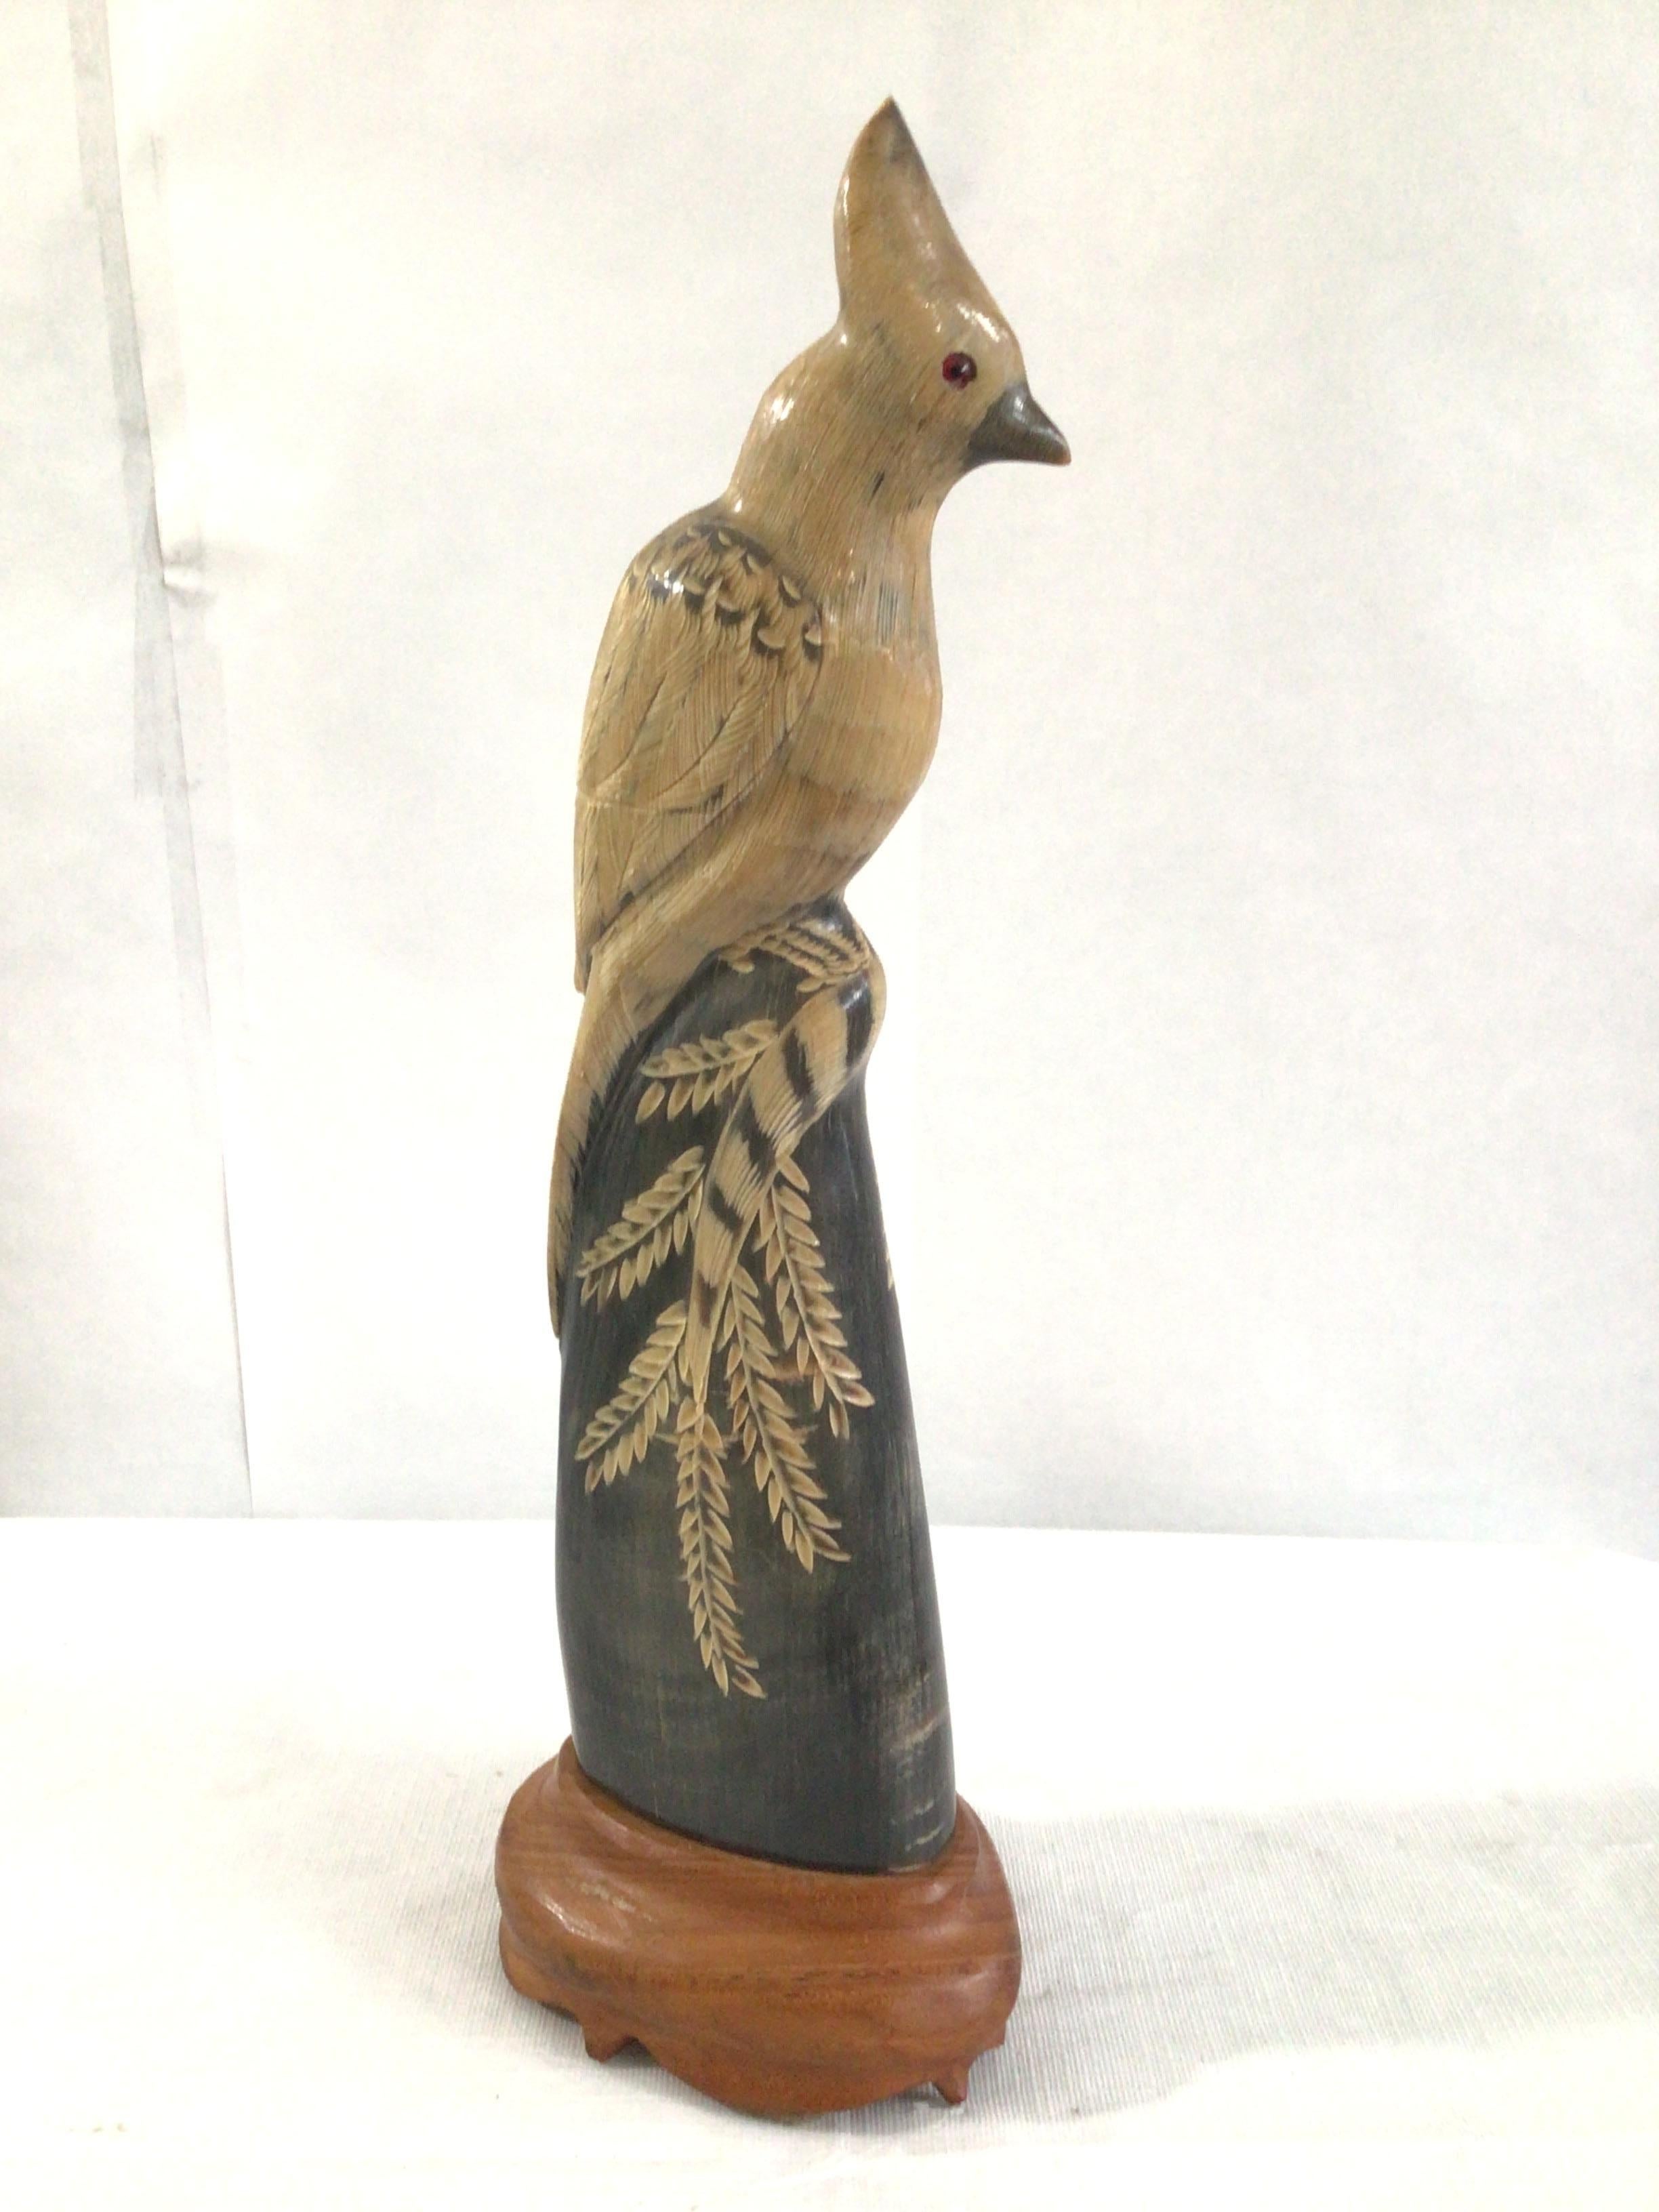 1940s Vintage Carved Water Buffalo Horn 
Hand Carved and Detailed Sculpture of a Parrot / Bird on a Wood base
Colors: Black, Tan, Natural Wood.